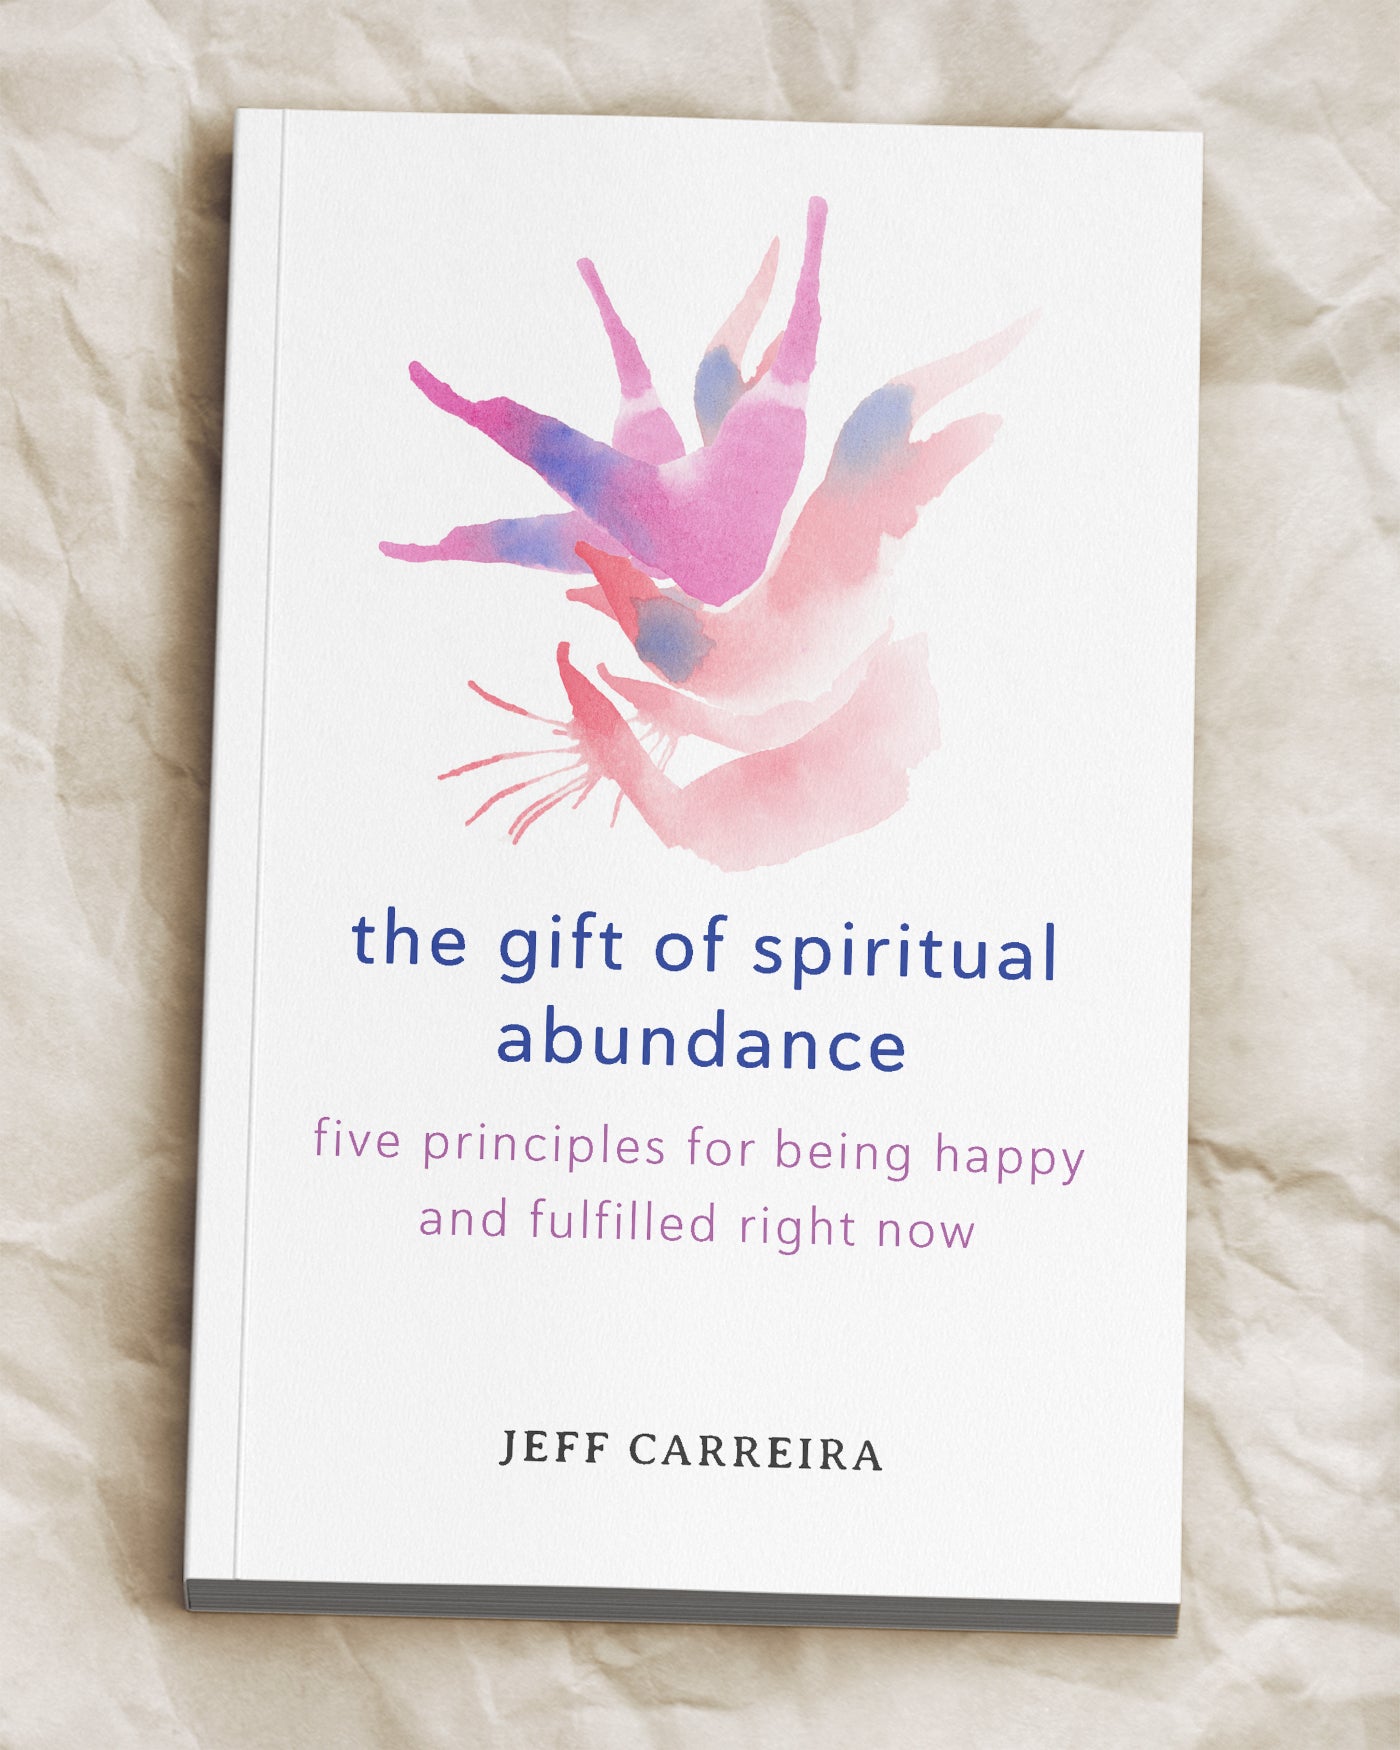 The Gift of Spiritual Abundance: Five Principles for Being Happy and Fulfilled Right Now